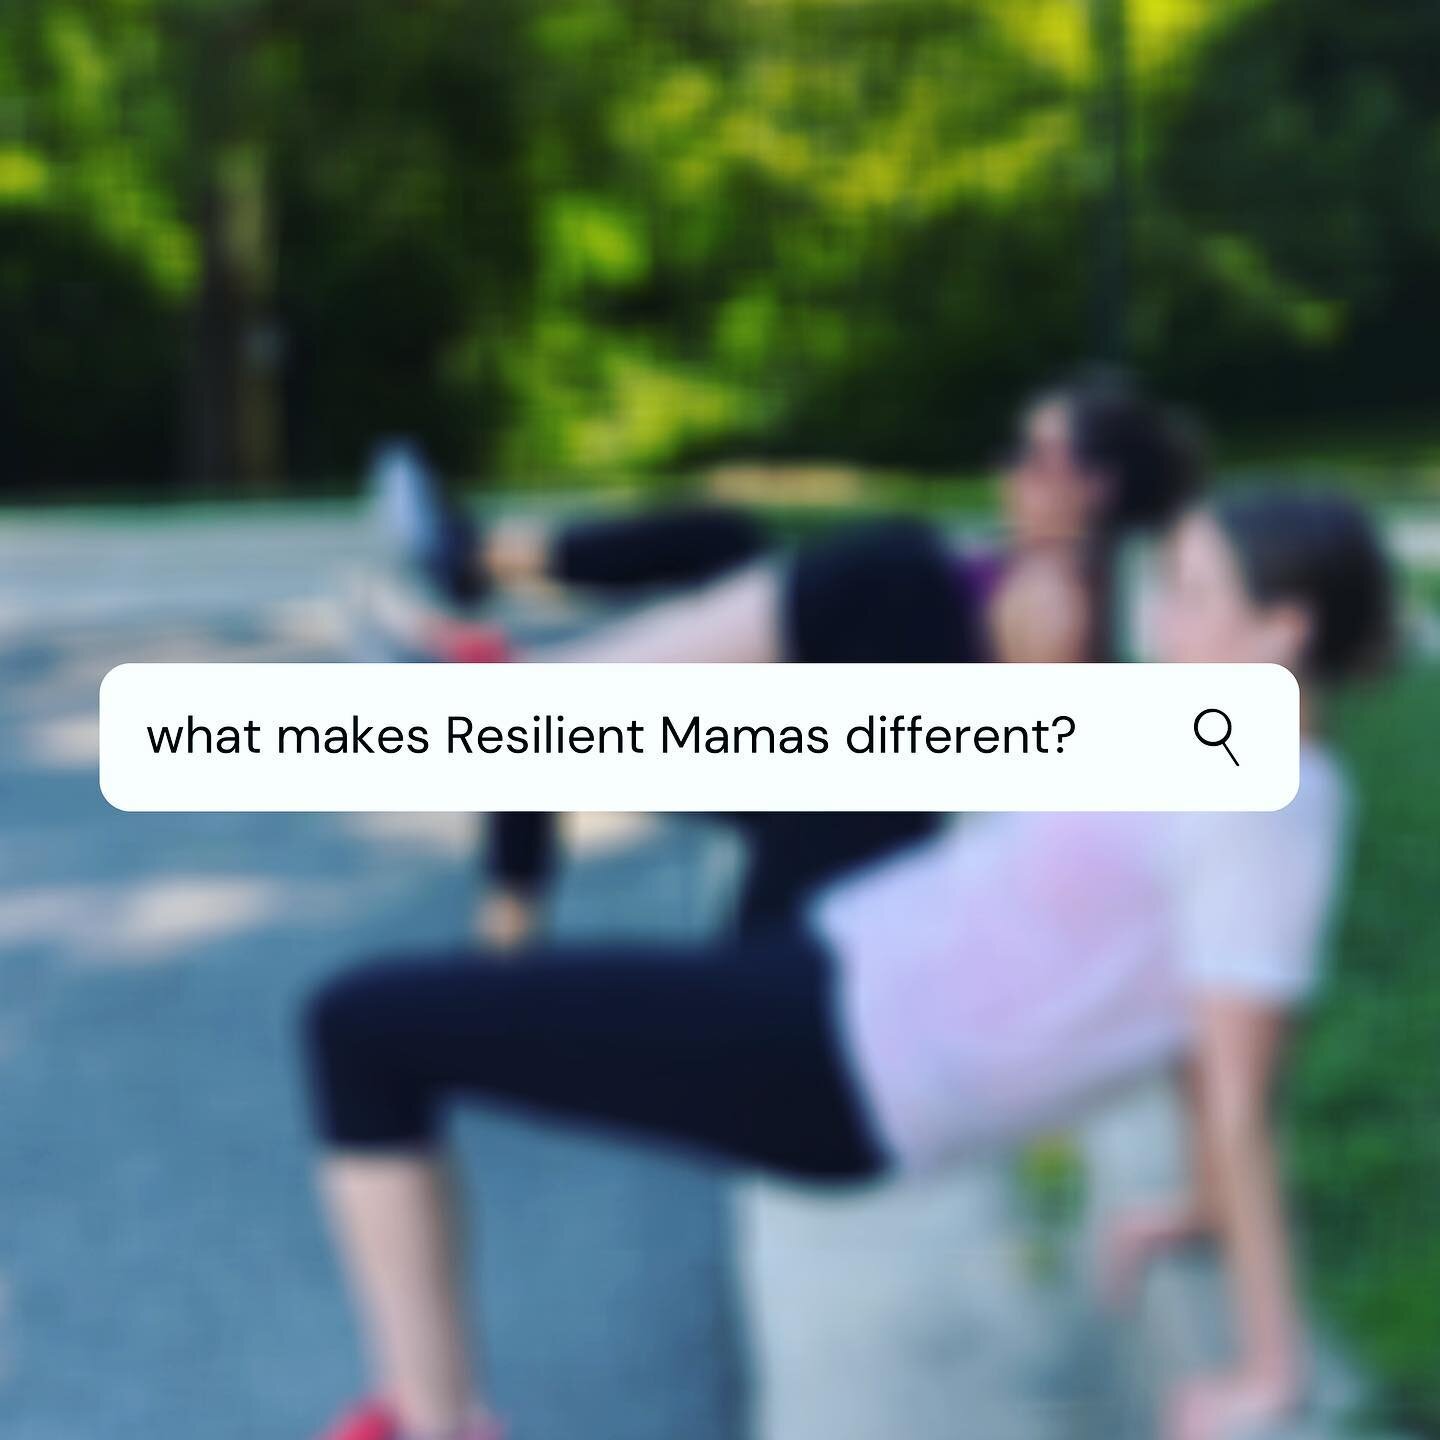 4 Ways Resilient Mamas is Different

If you&rsquo;re local, there is a wide selection of classes geared toward moms. With so many options, why choose Resilient Mamas? 

⚡️As a client recently put it, coaching that makes you &ldquo;feel safe.&rdquo; Y